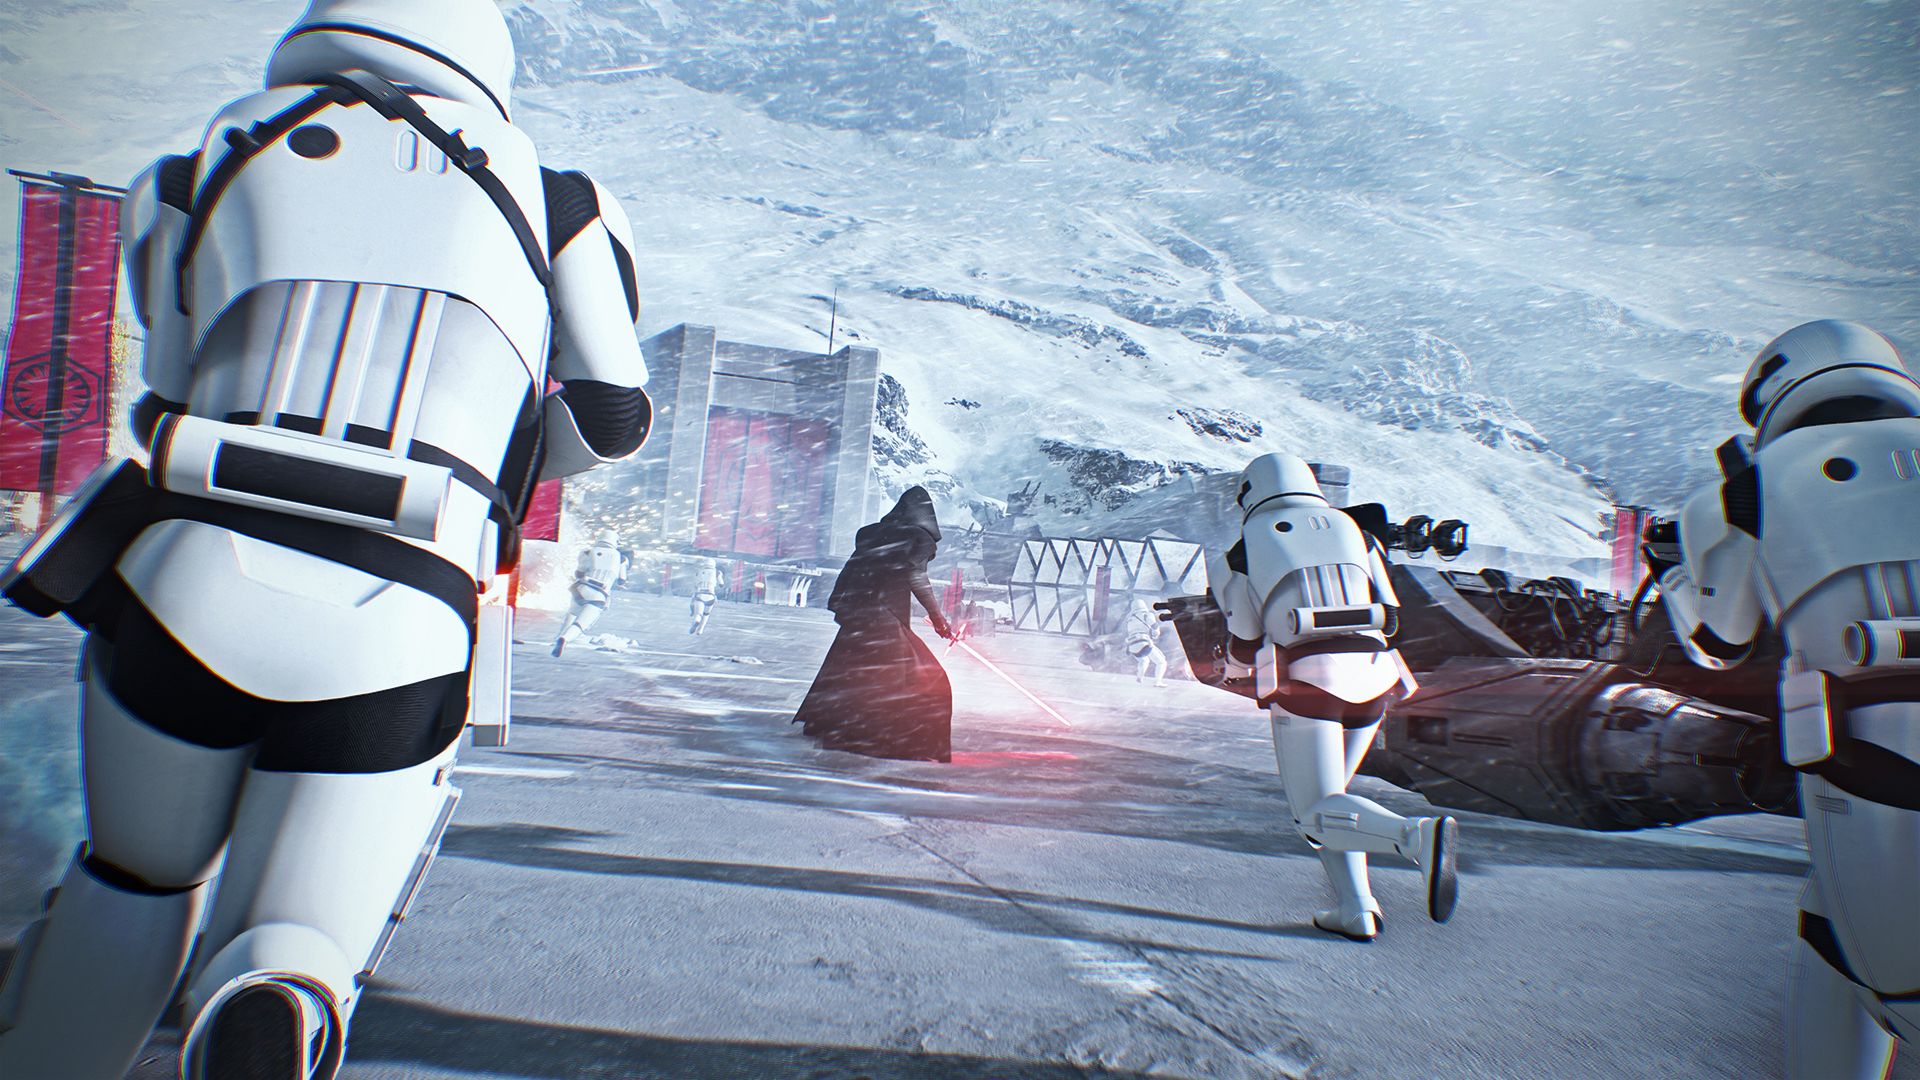 Image for EA digital sale drops Battlefront 2 to $4.50, Titanfall 2 to $5 and Dragon Age: Inquisition to $8